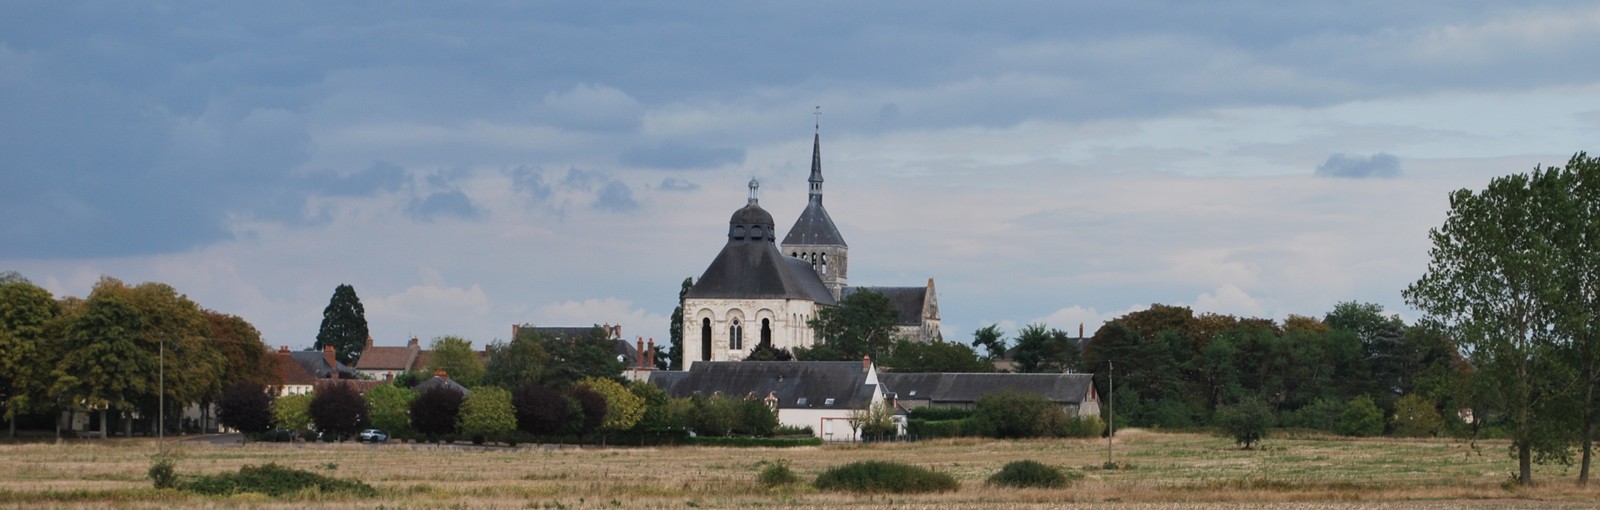 Tours Escapades and delight in Le Loiret - Full days - Day tours from Paris